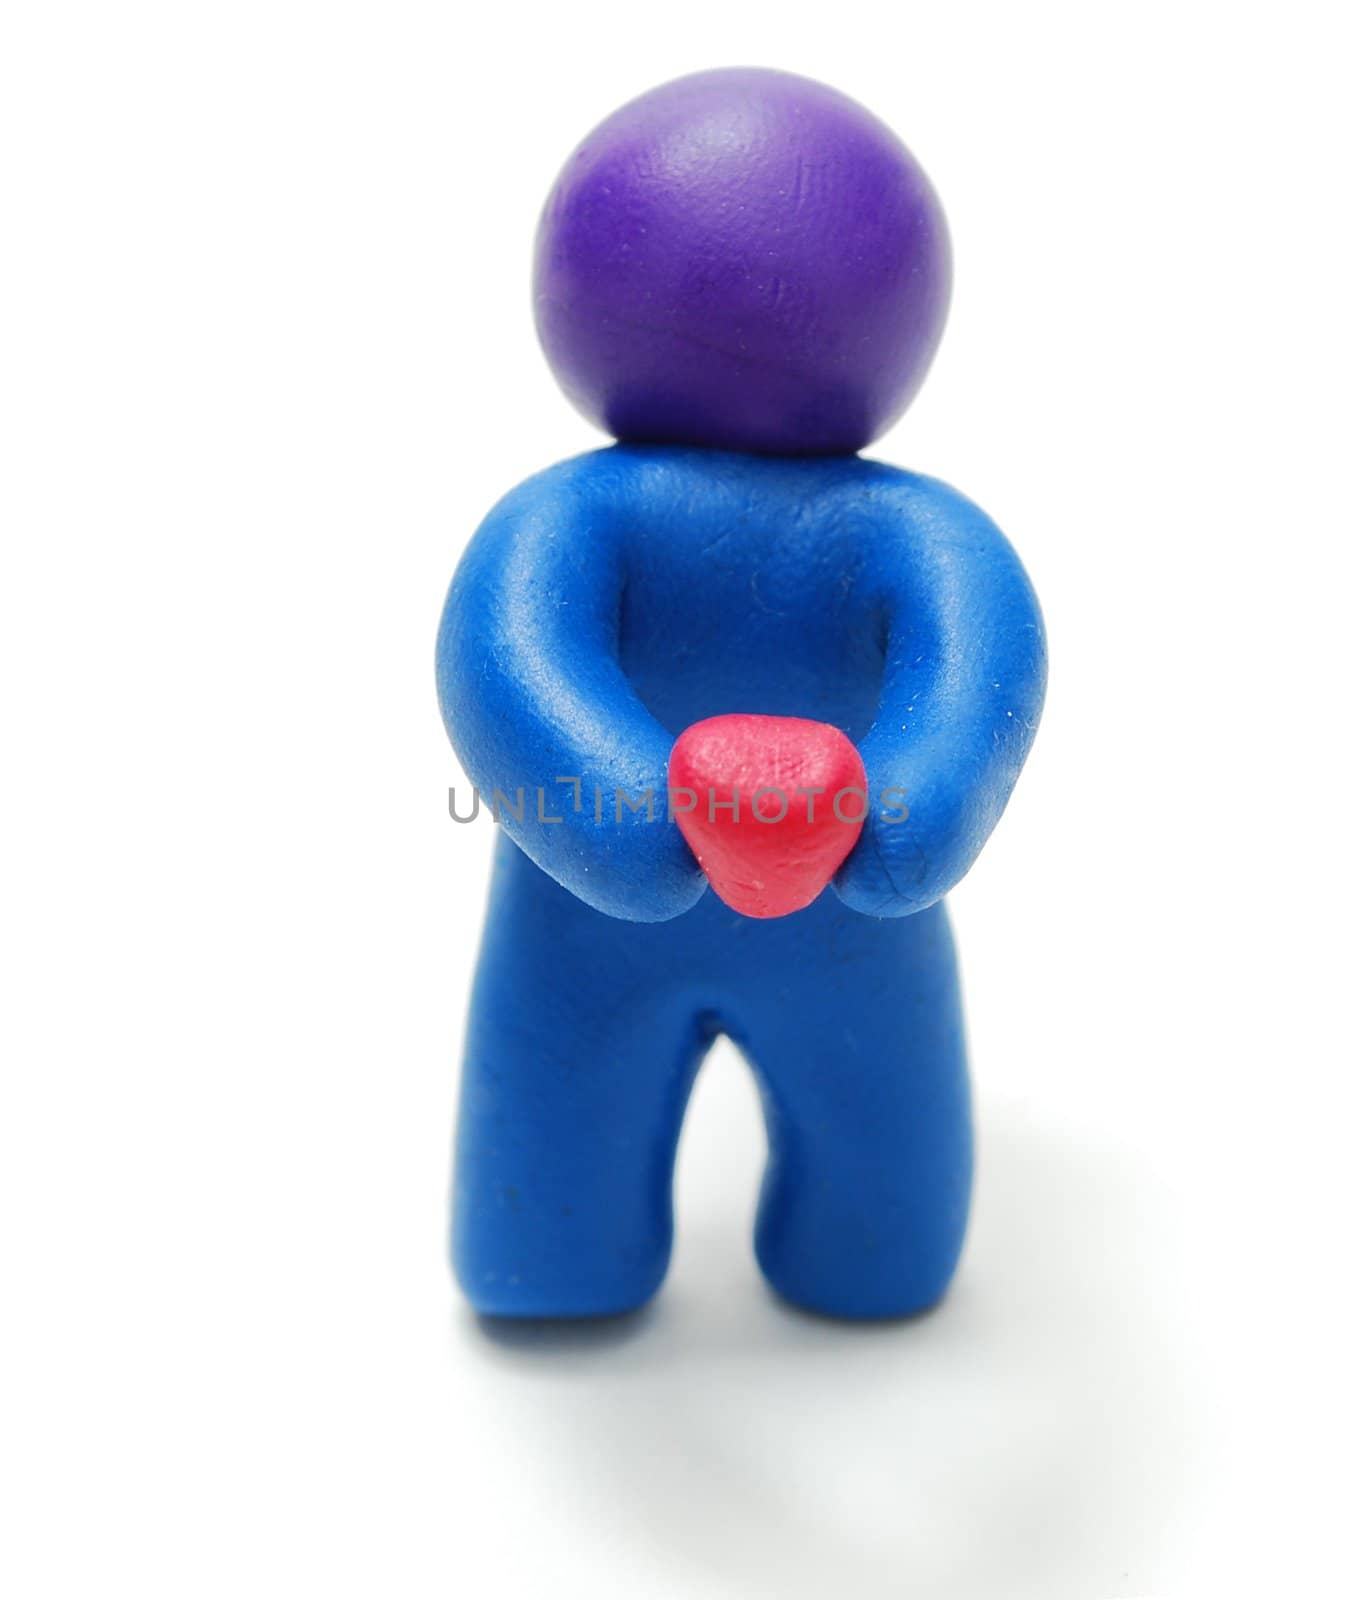 Plasticine Man Holding Heart by Ale059